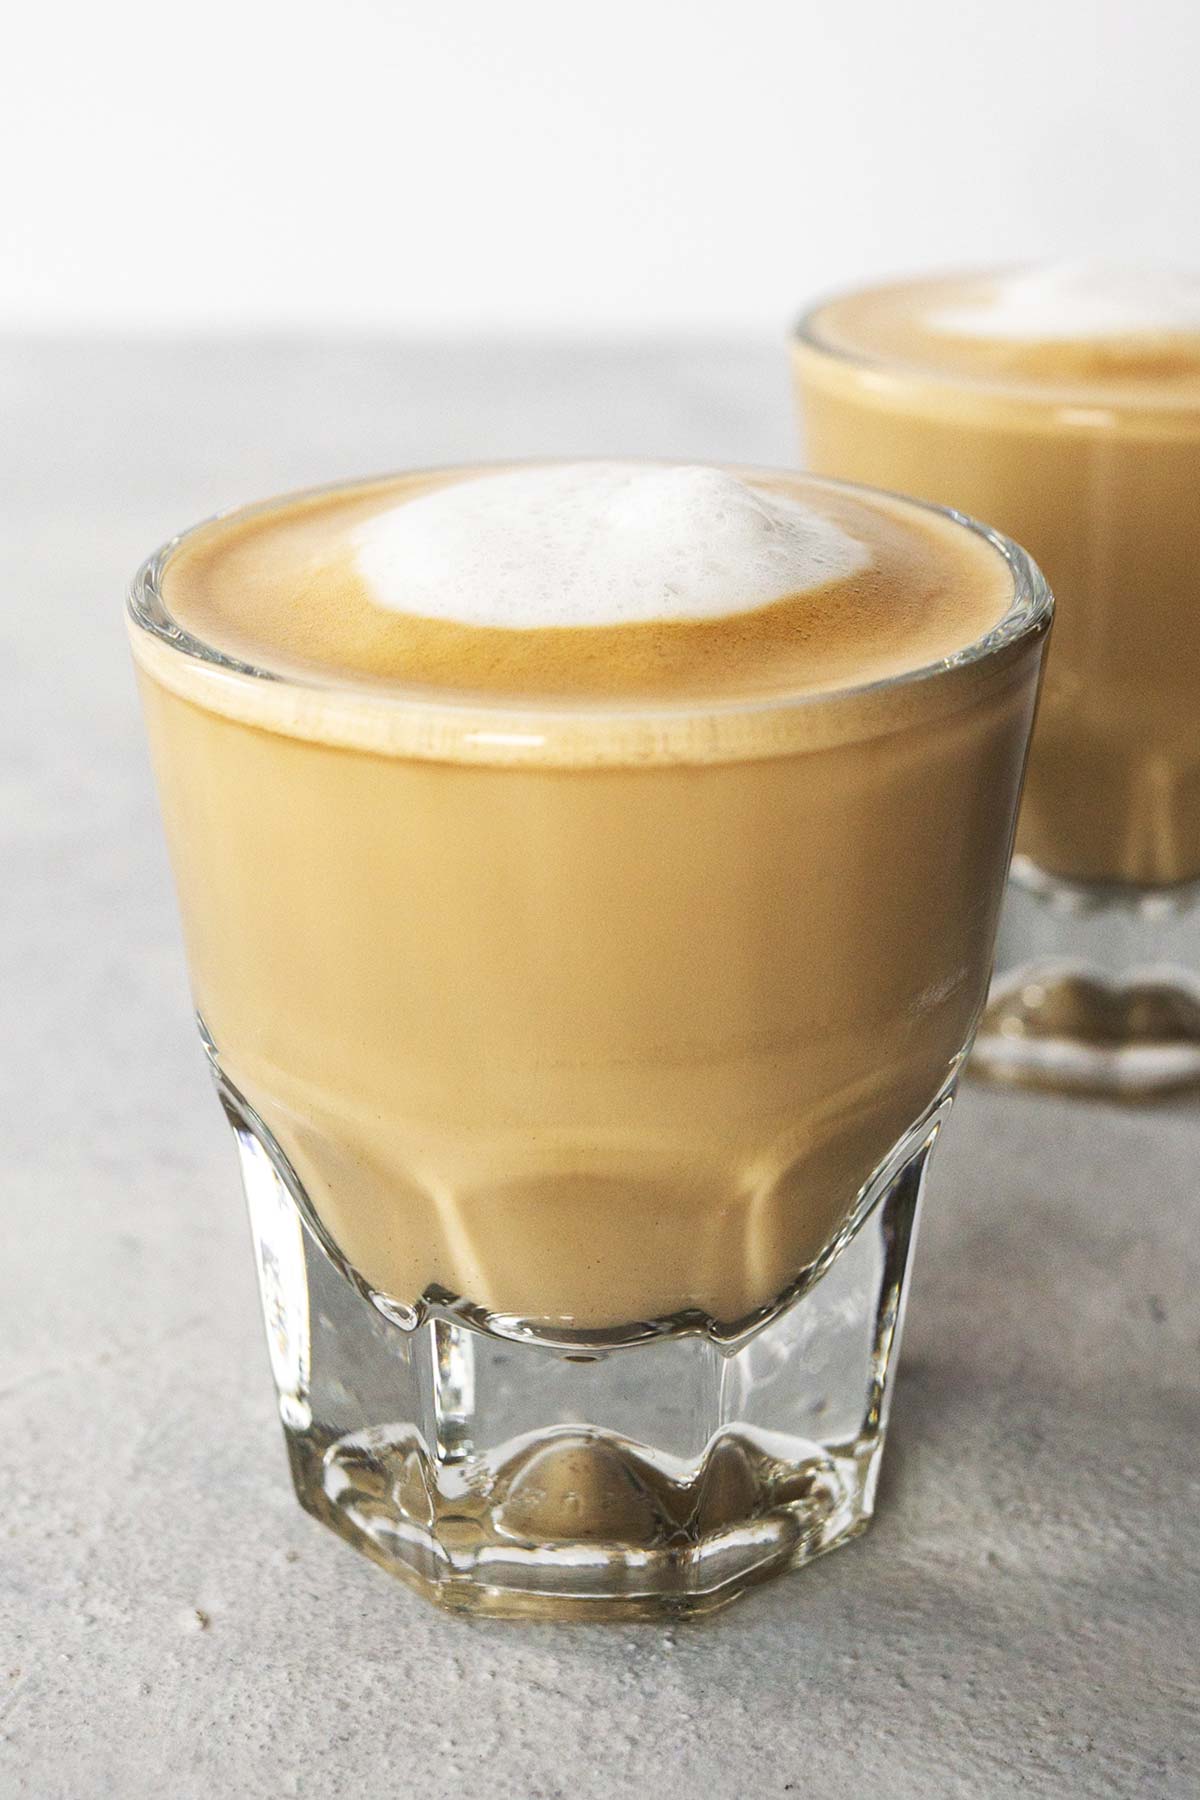 Iced Cortado – What Is It and How Do You Make It at Home?